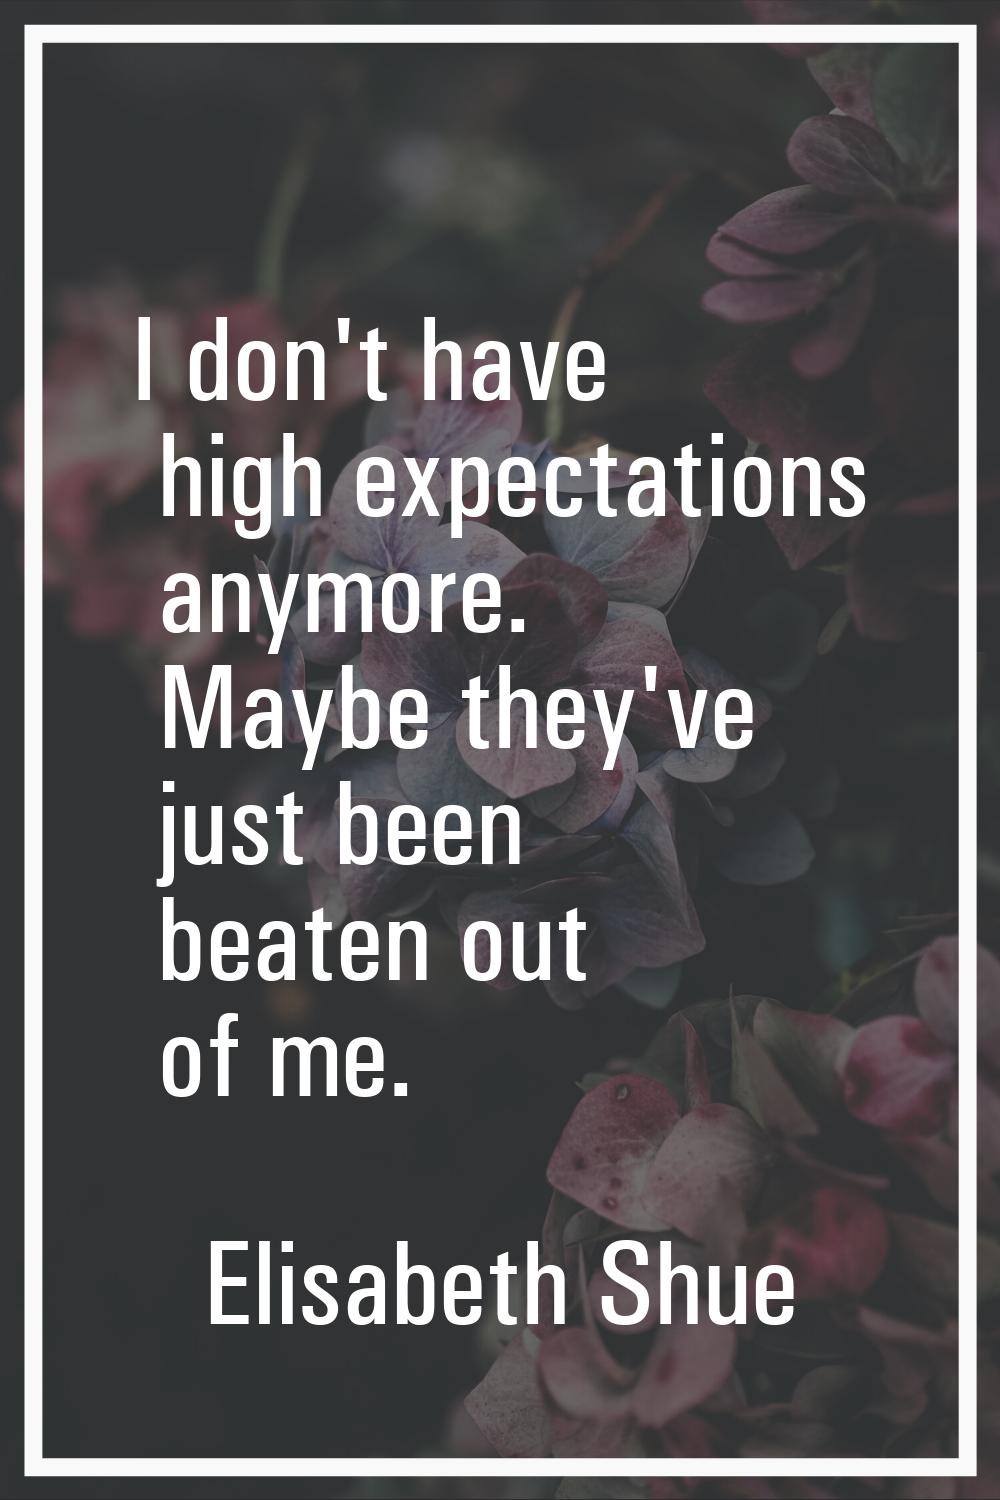 I don't have high expectations anymore. Maybe they've just been beaten out of me.